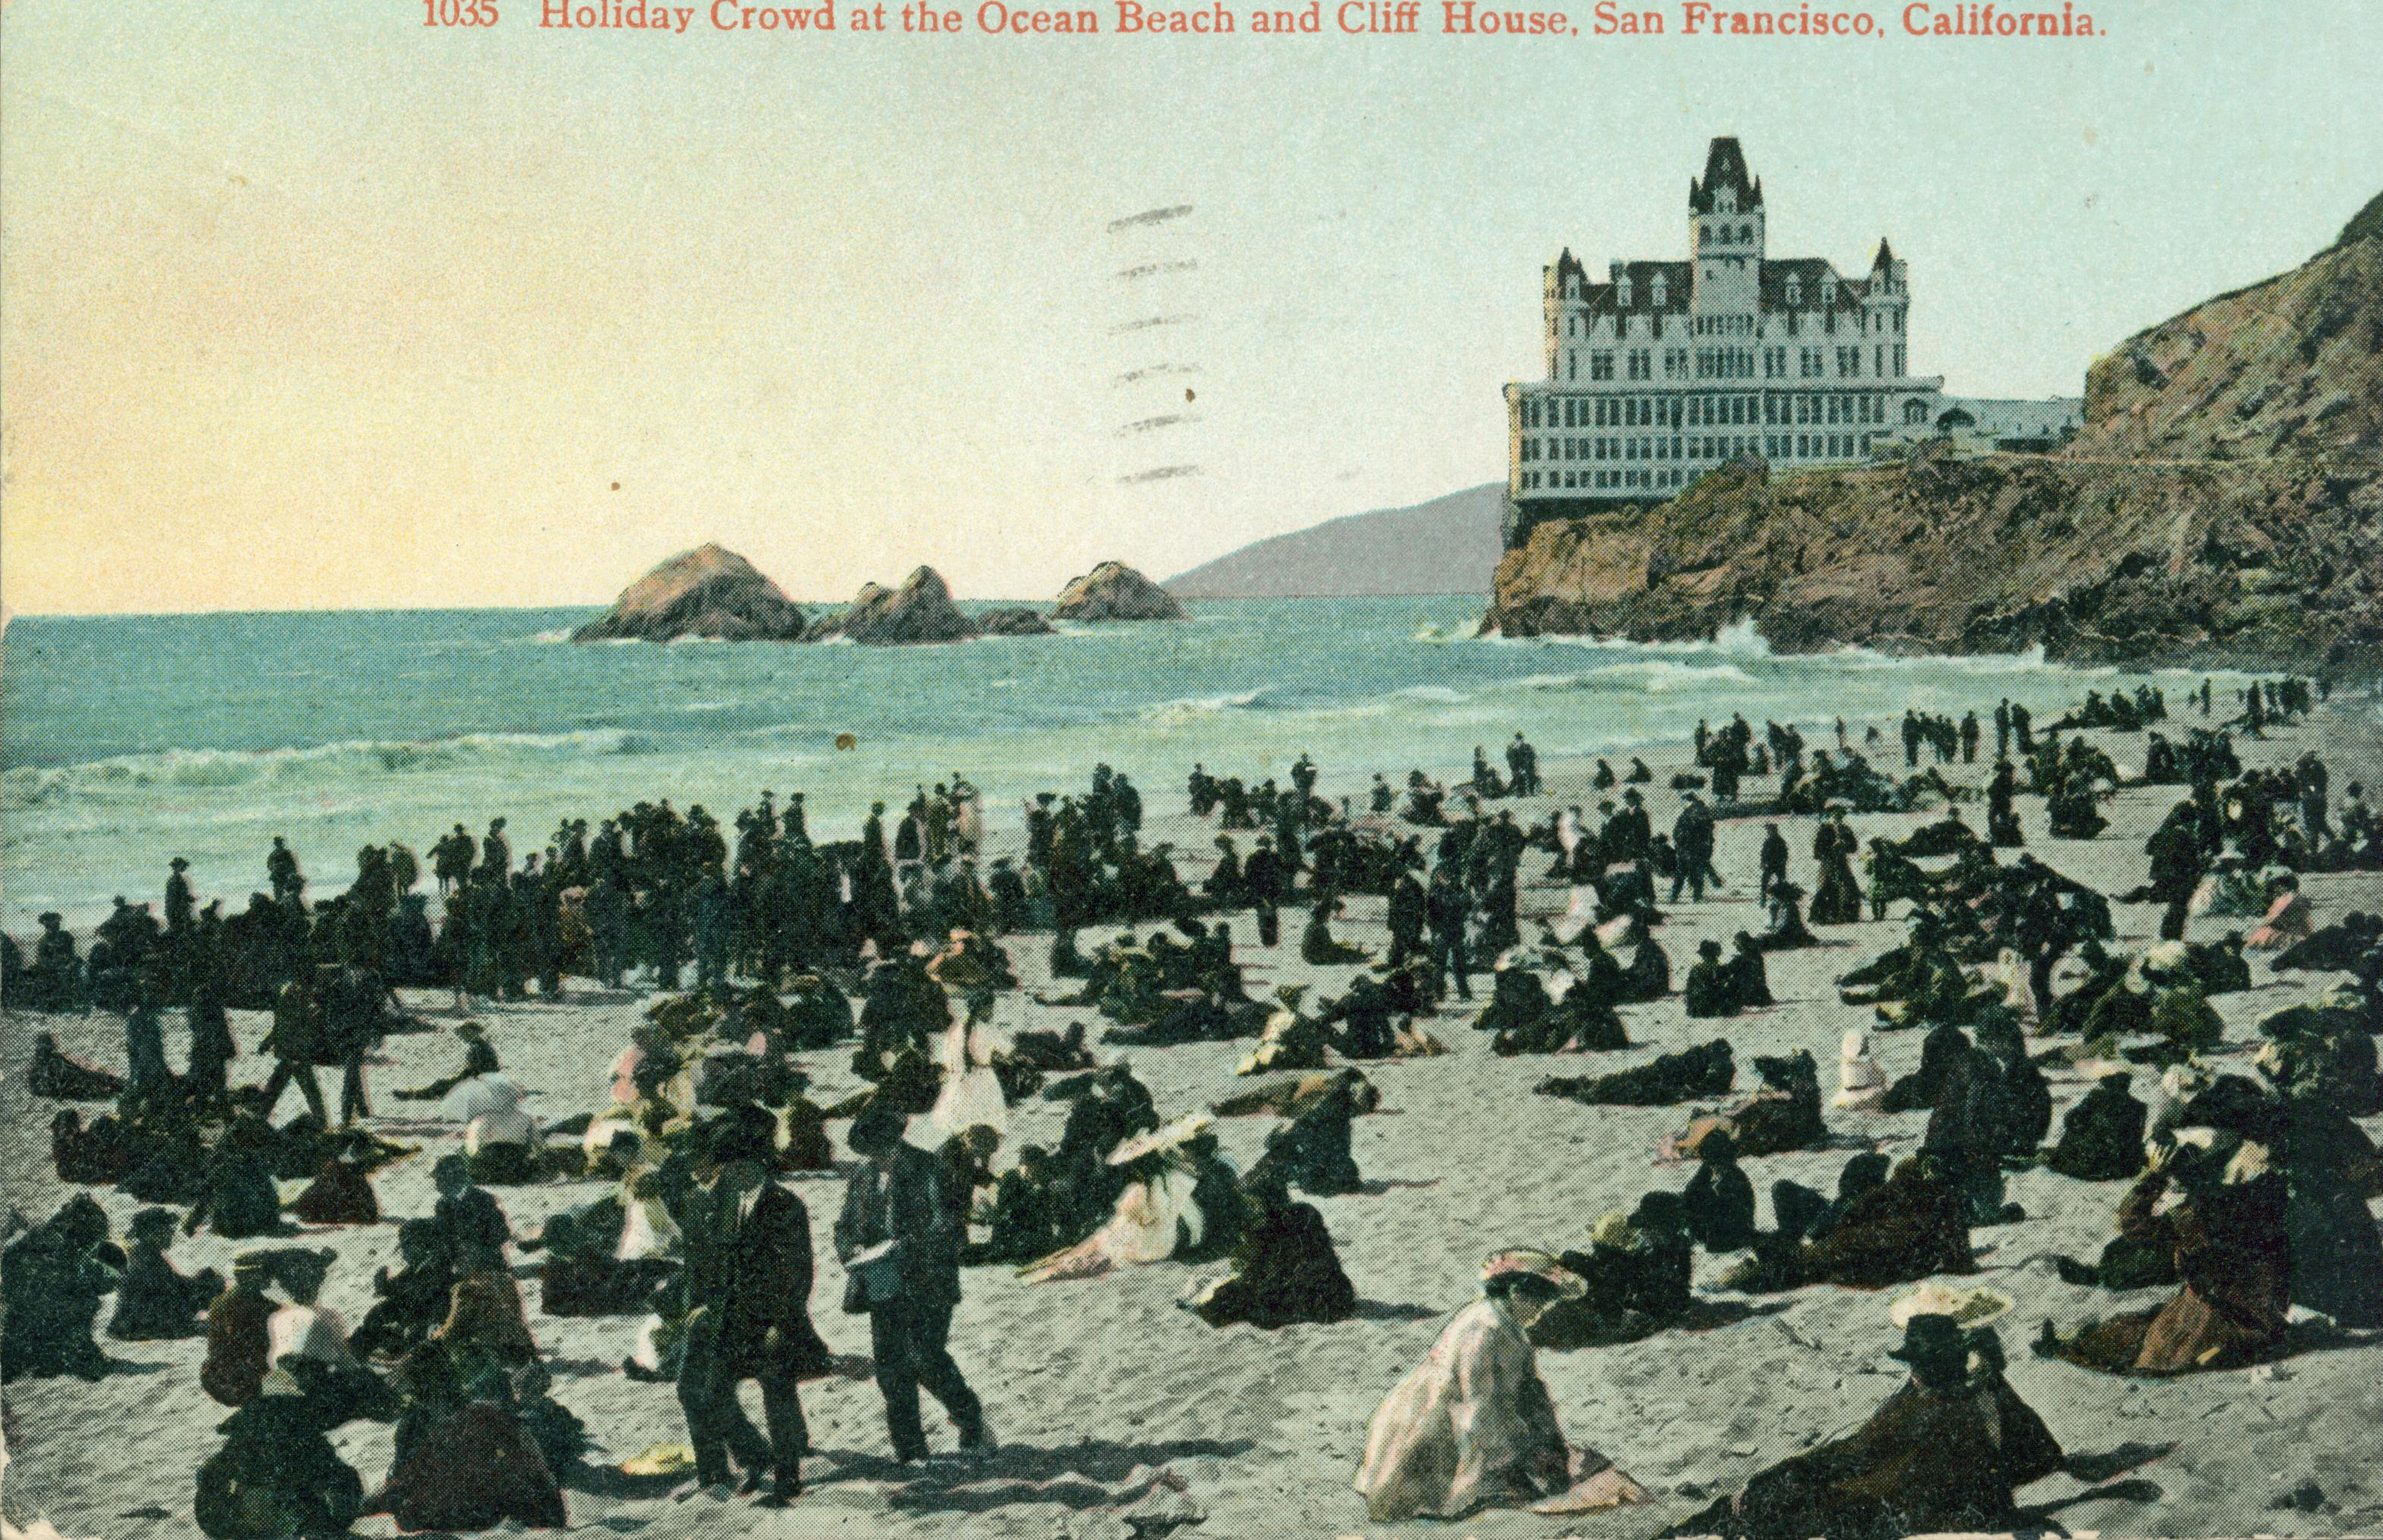 Shows the Cliff House and Seal Rocks with a large number of onlookers on the beach